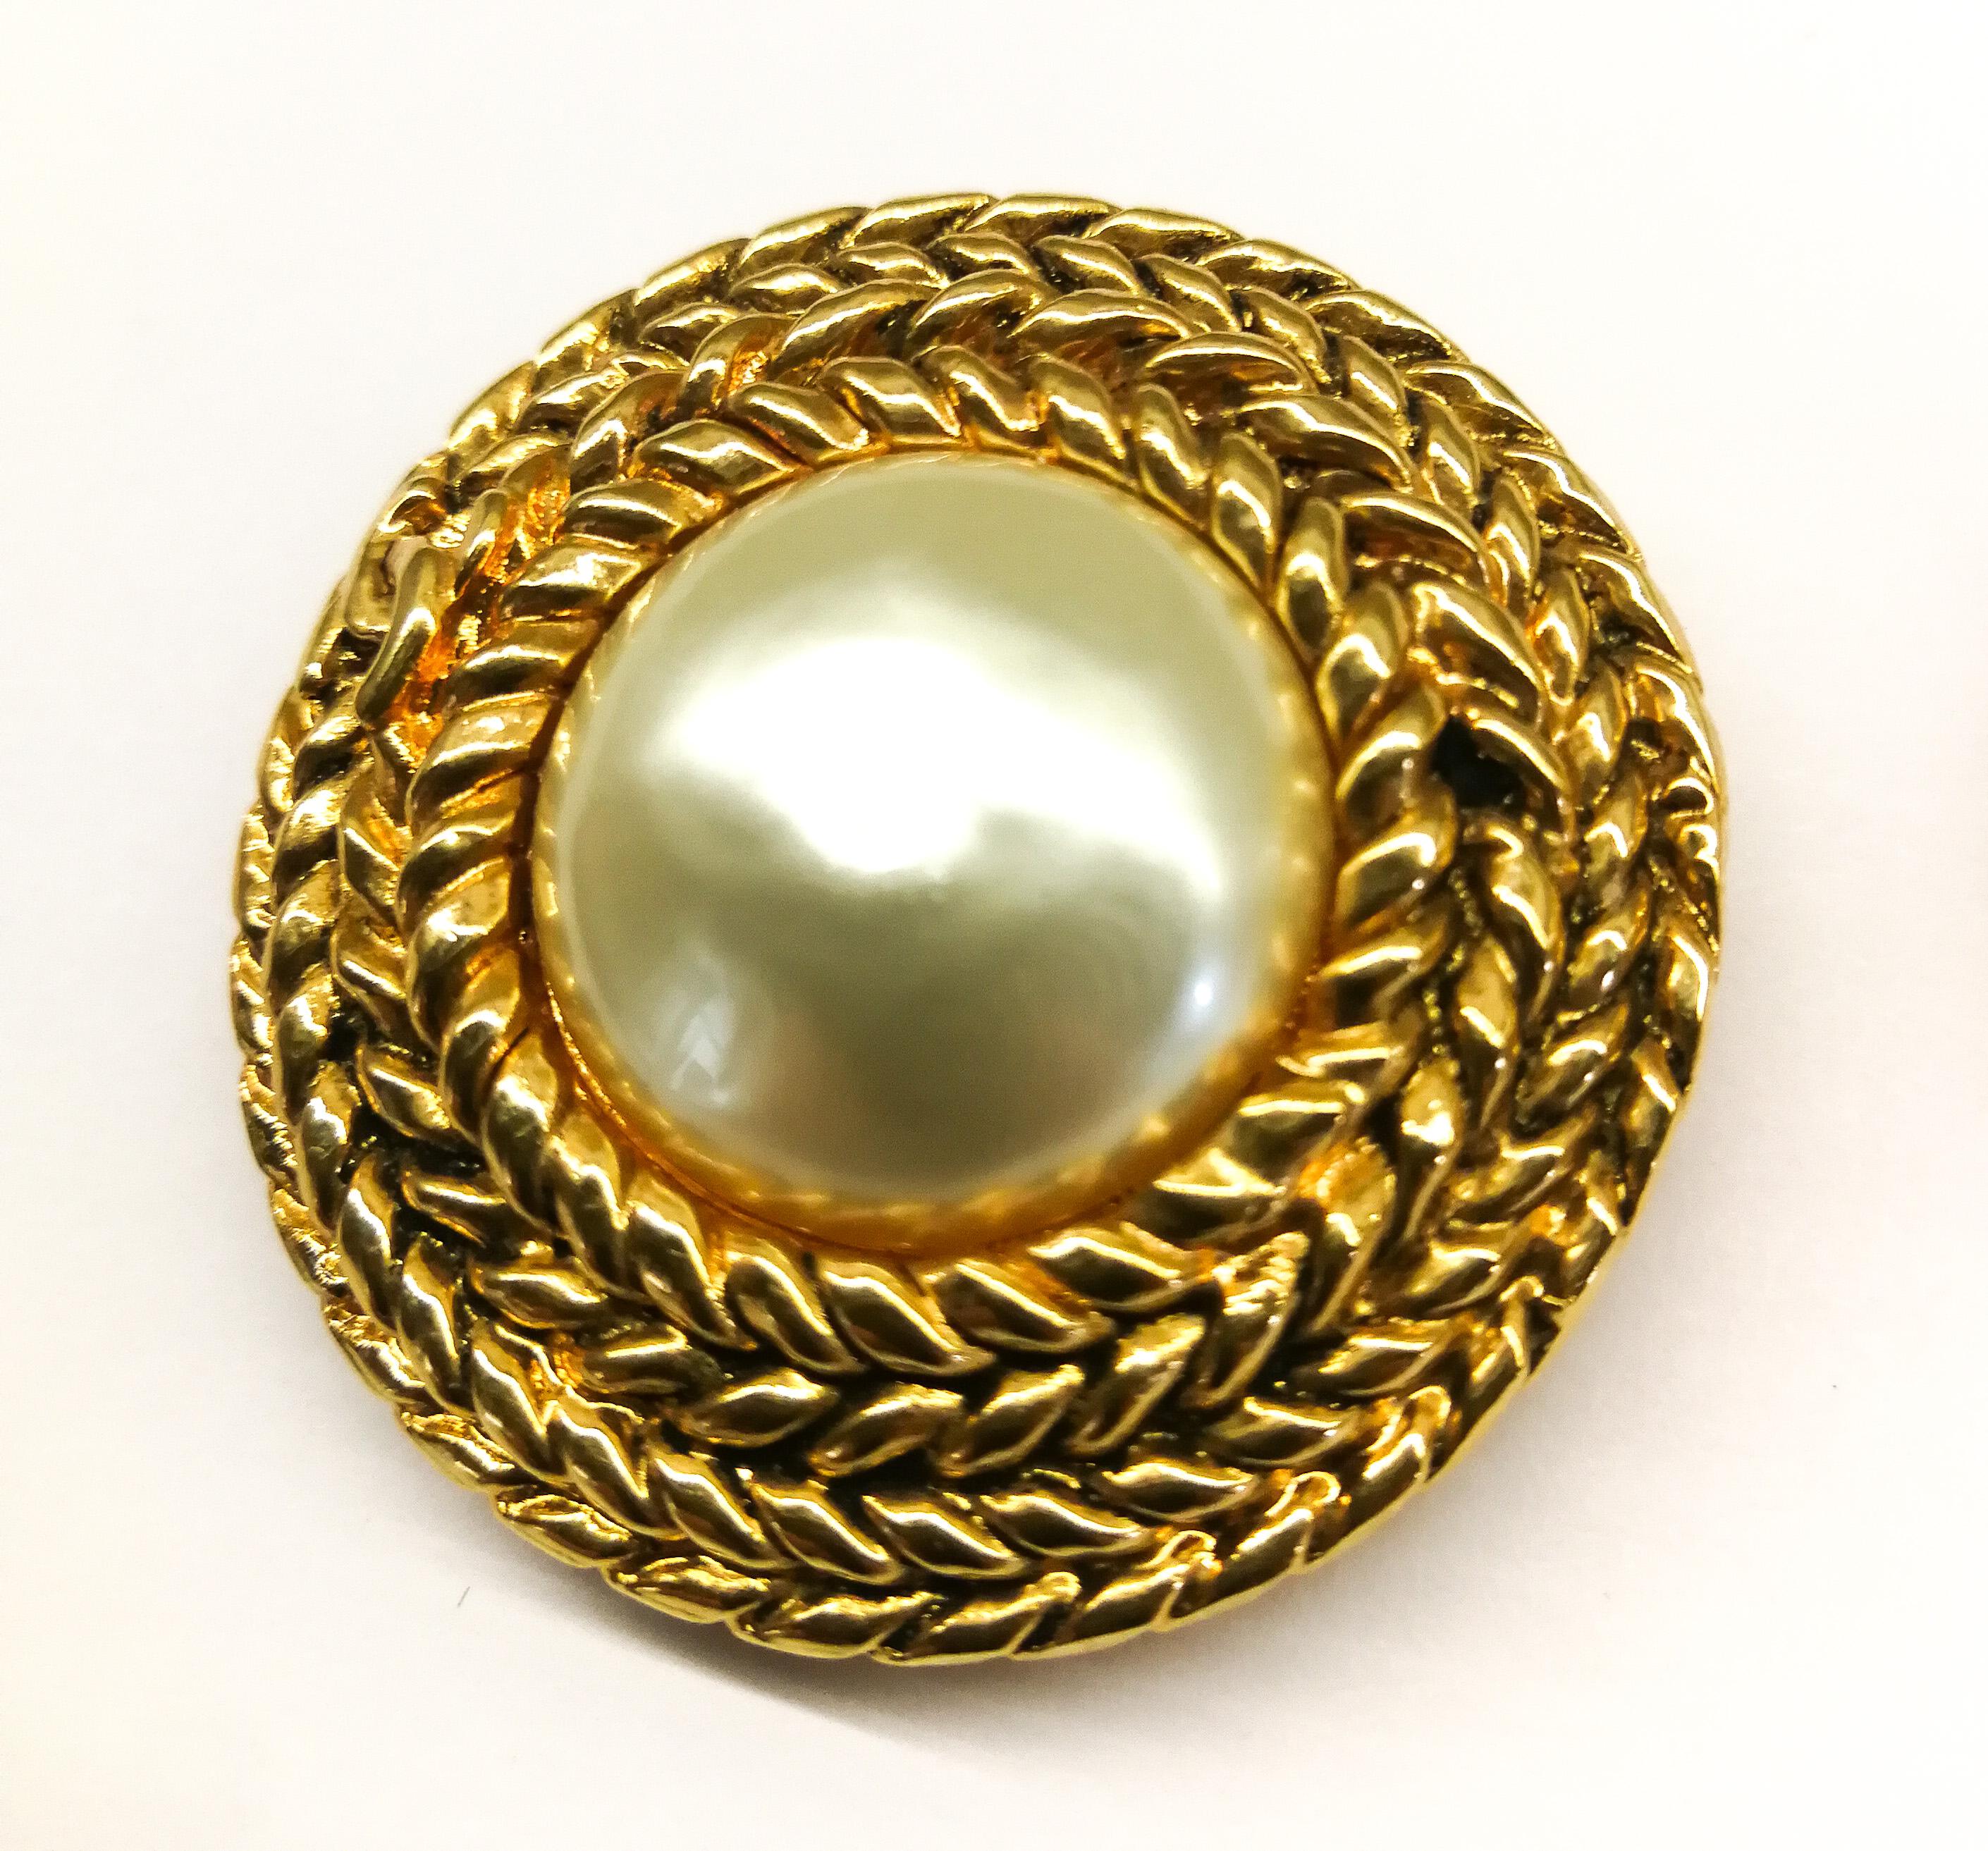 Classic pearl and gilt earrings , designed by Victoire de Castellane for Chanel, with a plaited gilt braid encircling the baroque pearl, with the iconic 'CC' motif interwoven. Smart, timeless and ulitmately wearable!
Not much needs to be said about